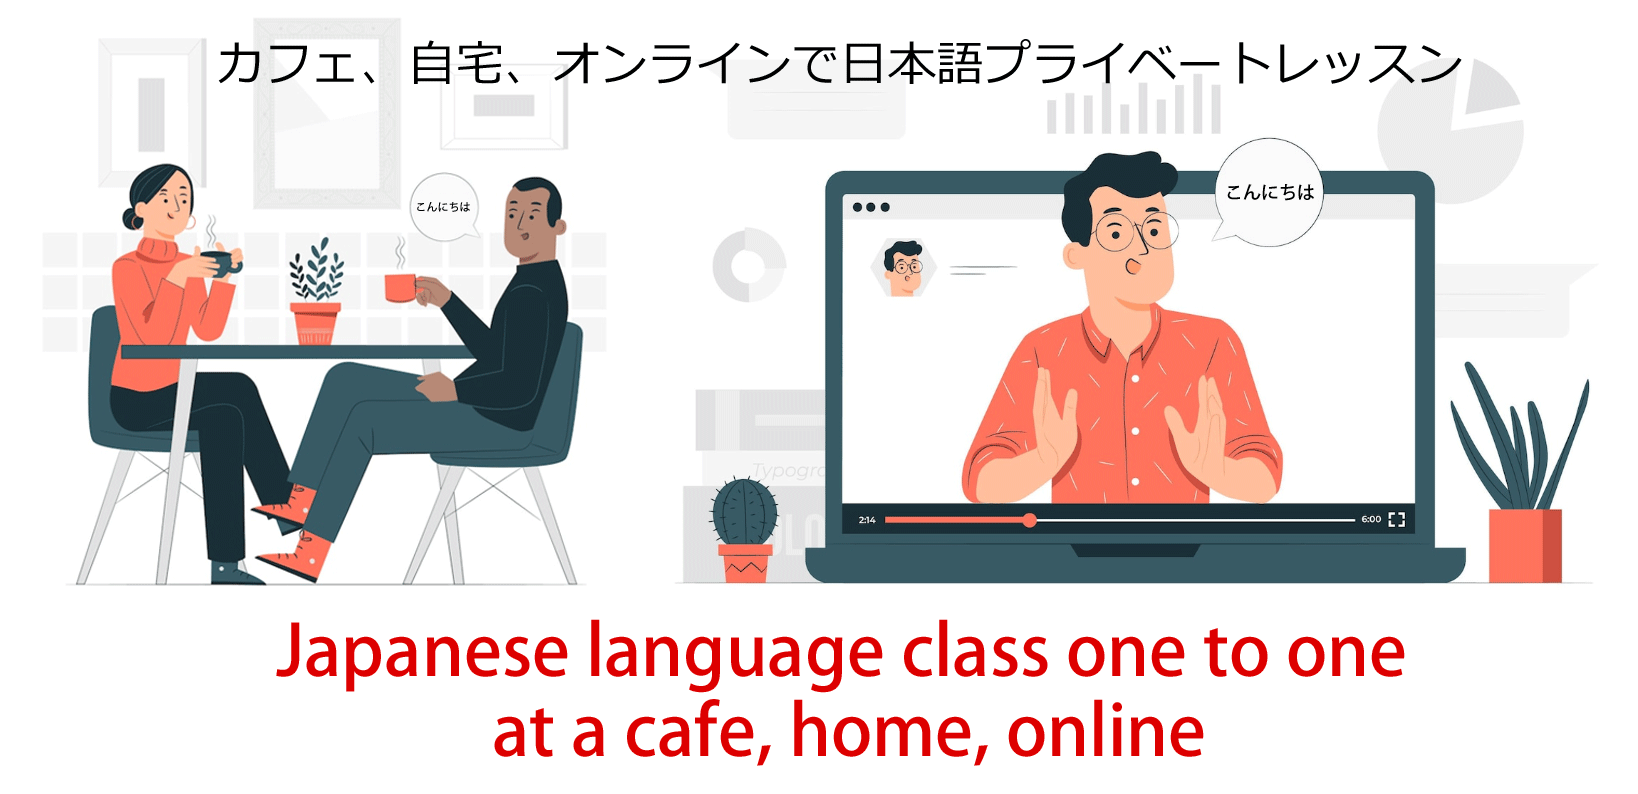 Japanese language class at a cafe, home, online